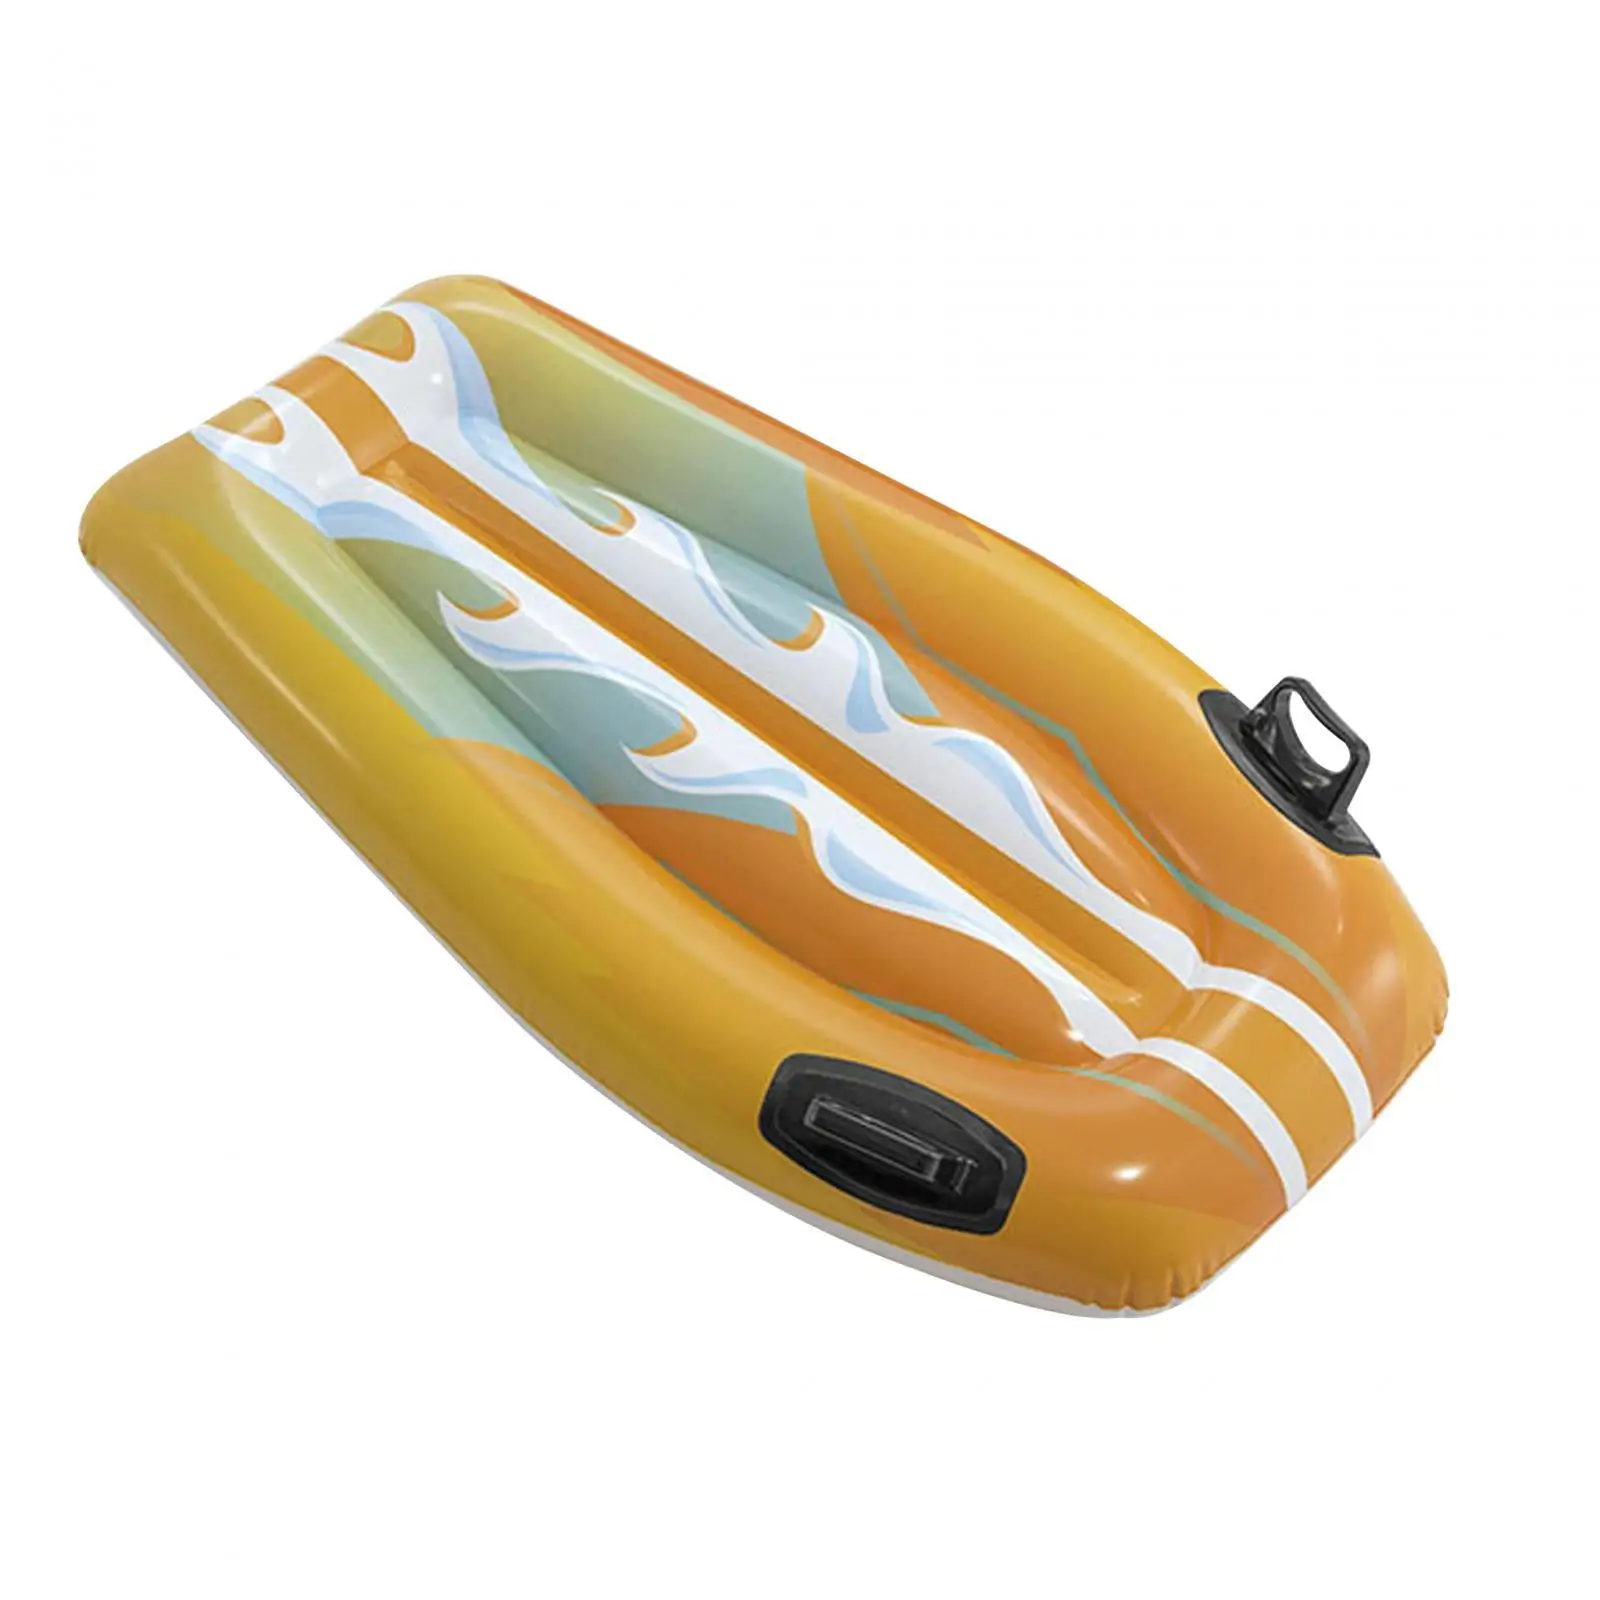 Inflatable Surfboard for Kids Portable Children Beach Surf Board with Handle